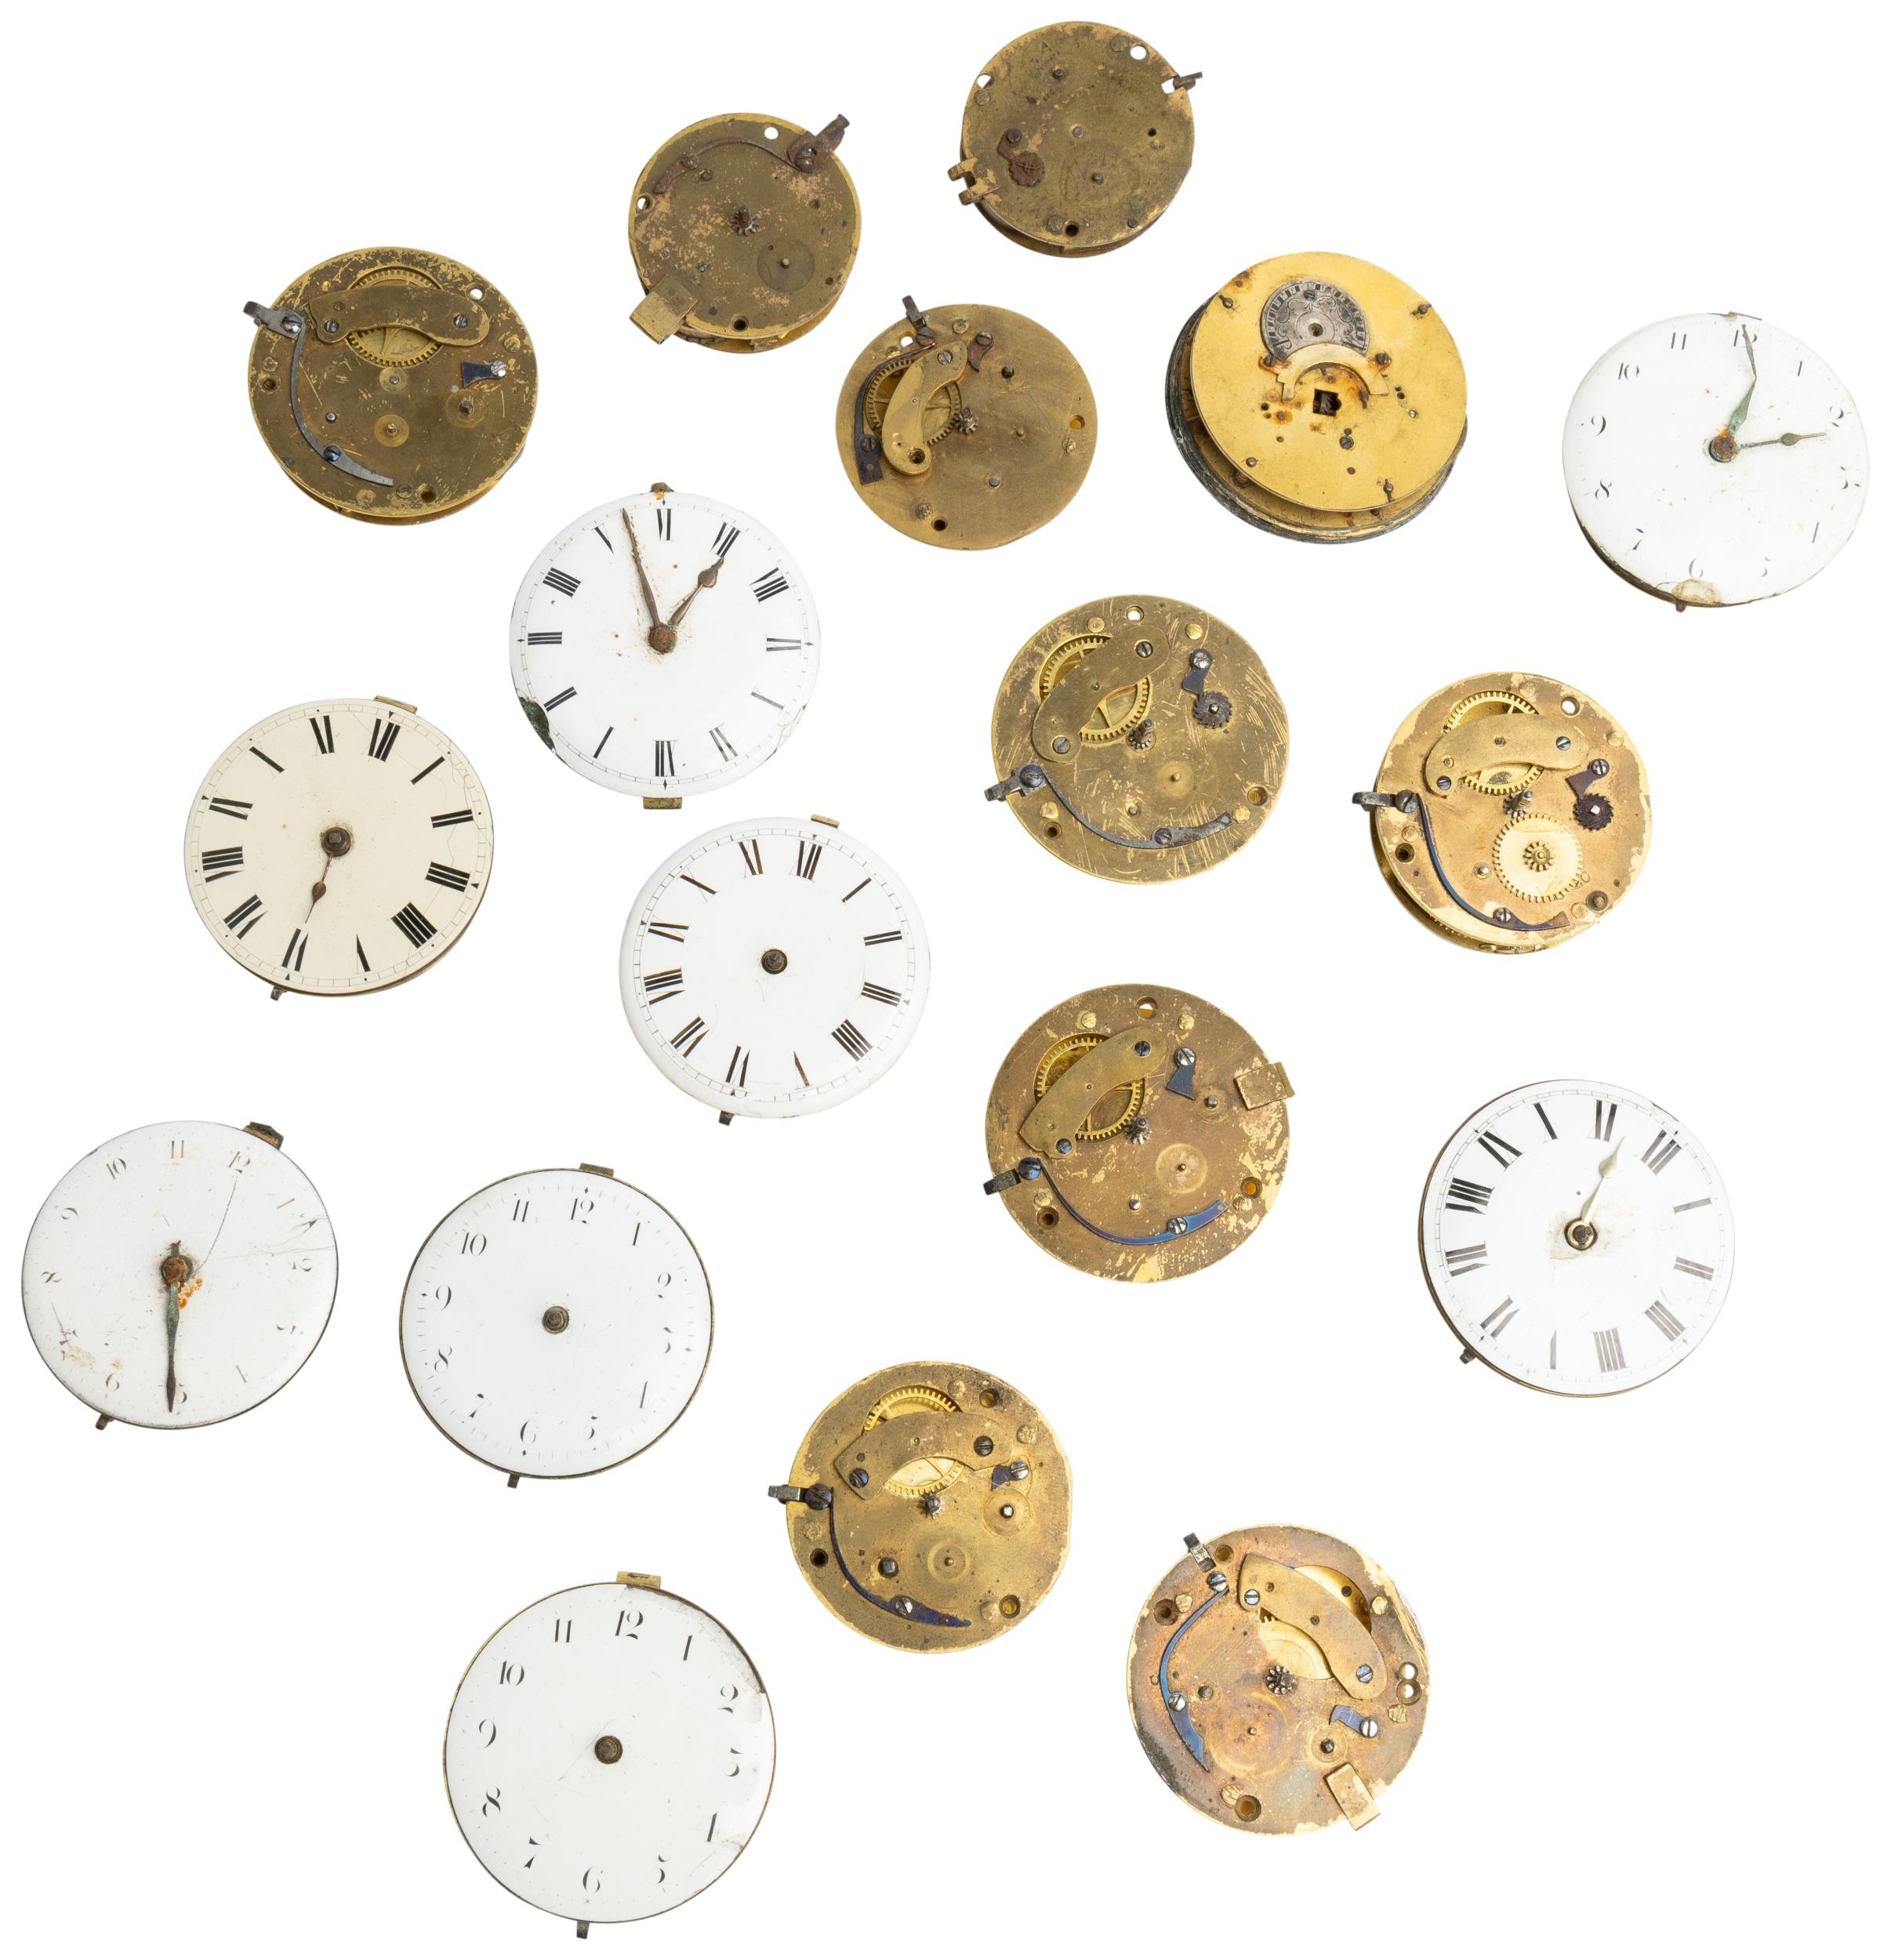 EIGHT VERGE WATCH MOVEMENTS with dials; nine verge movements with no dial; a Continental movement - Image 2 of 3